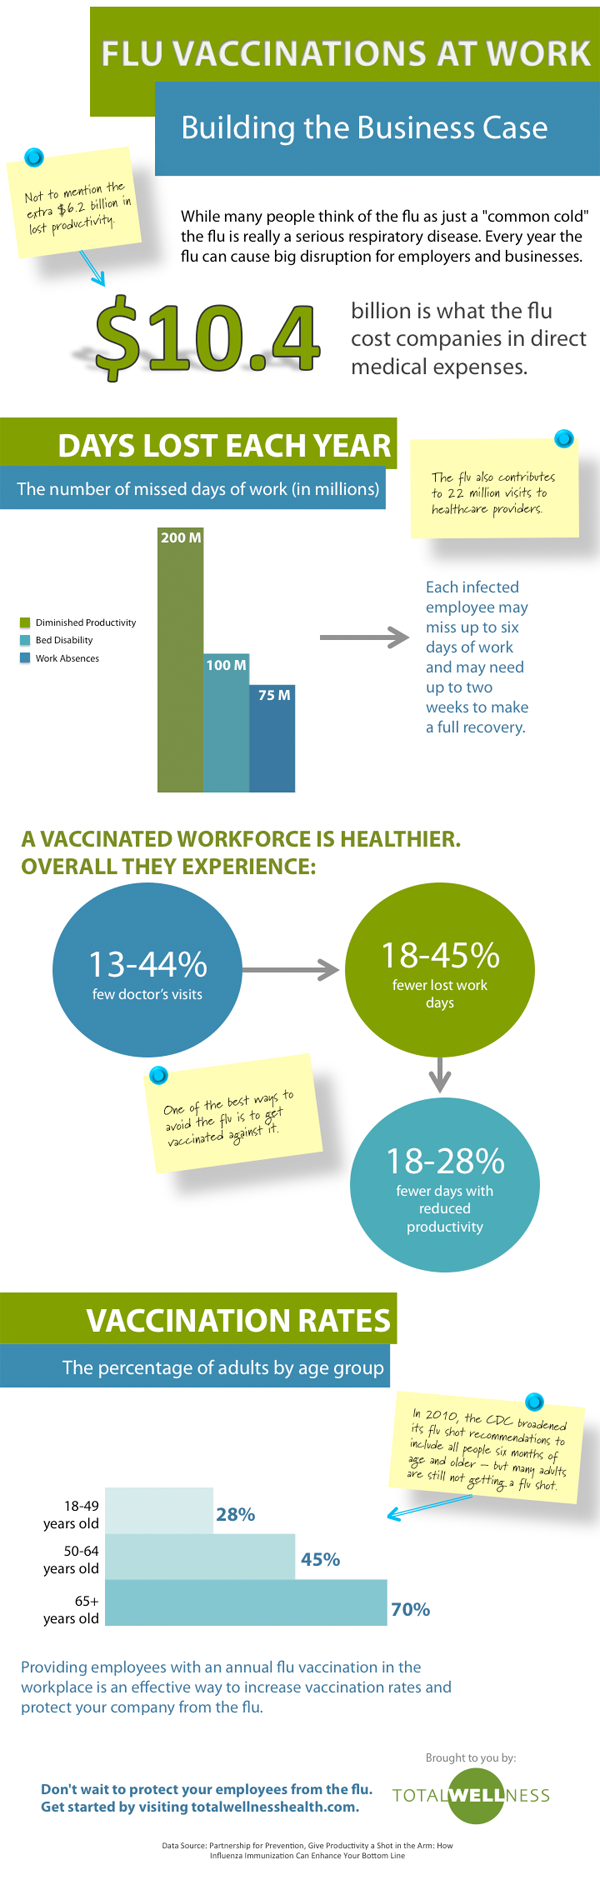 Vaccination at Work Infographic: Flu Vaccinations at Work - ComplianceandSafety.com